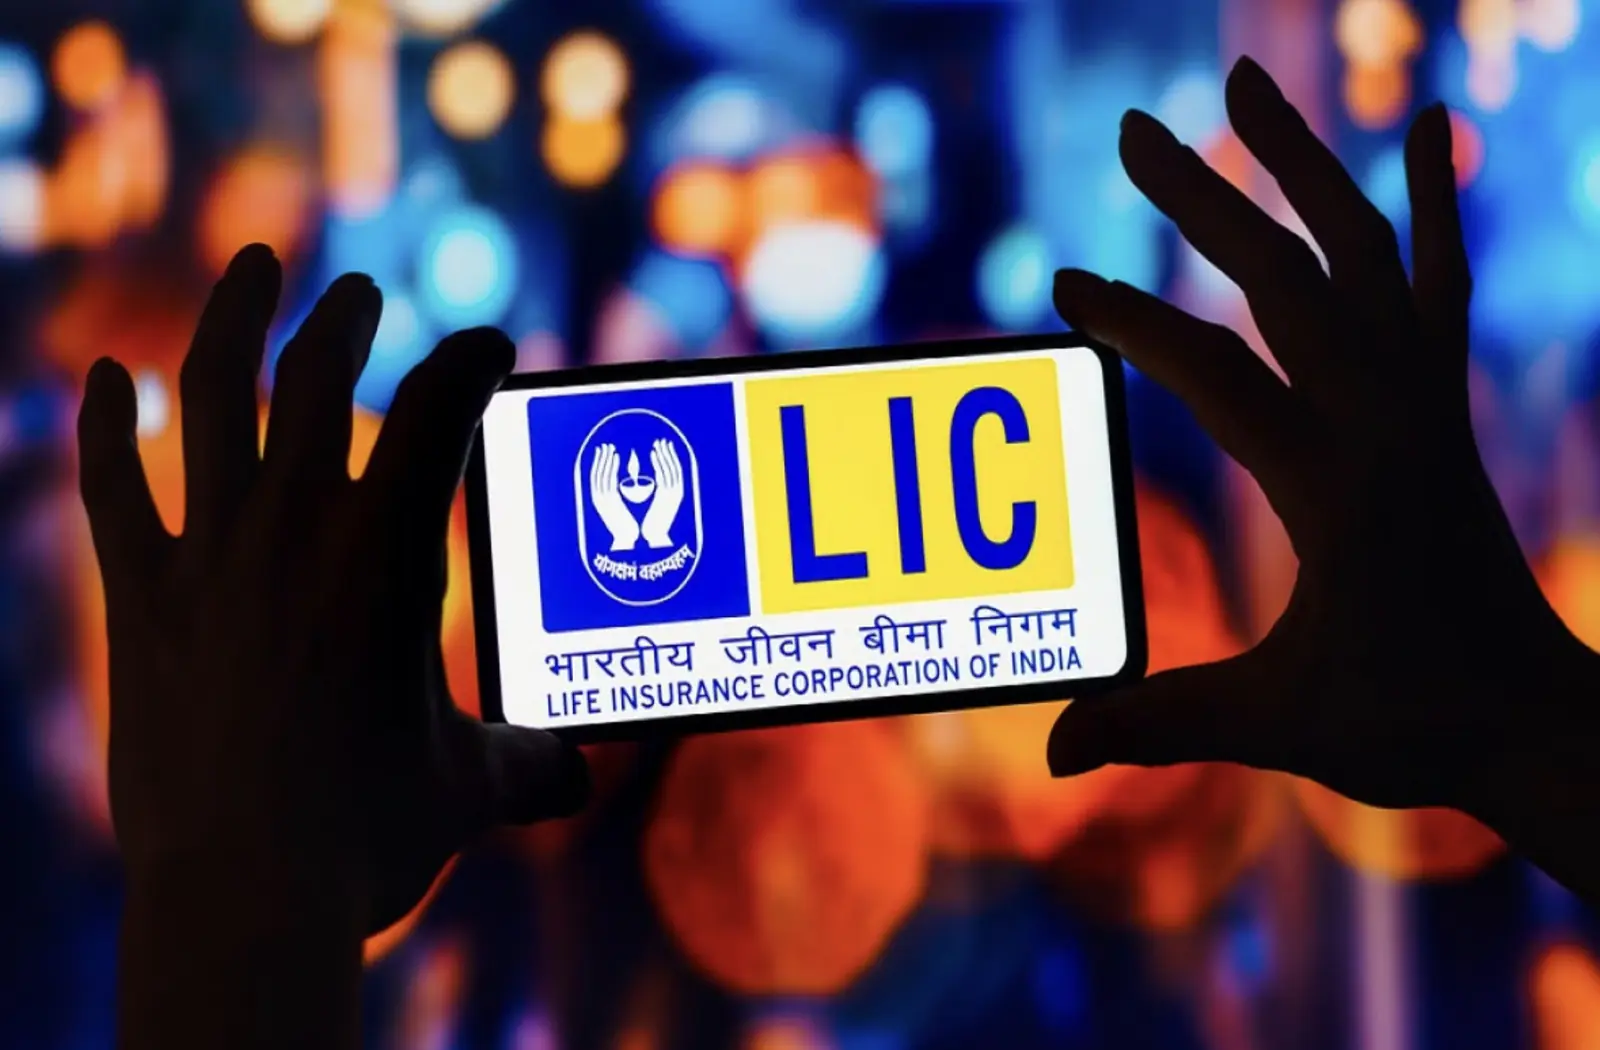 Promise of a better future with these schemes of LIC, getting the benefit of higher interest